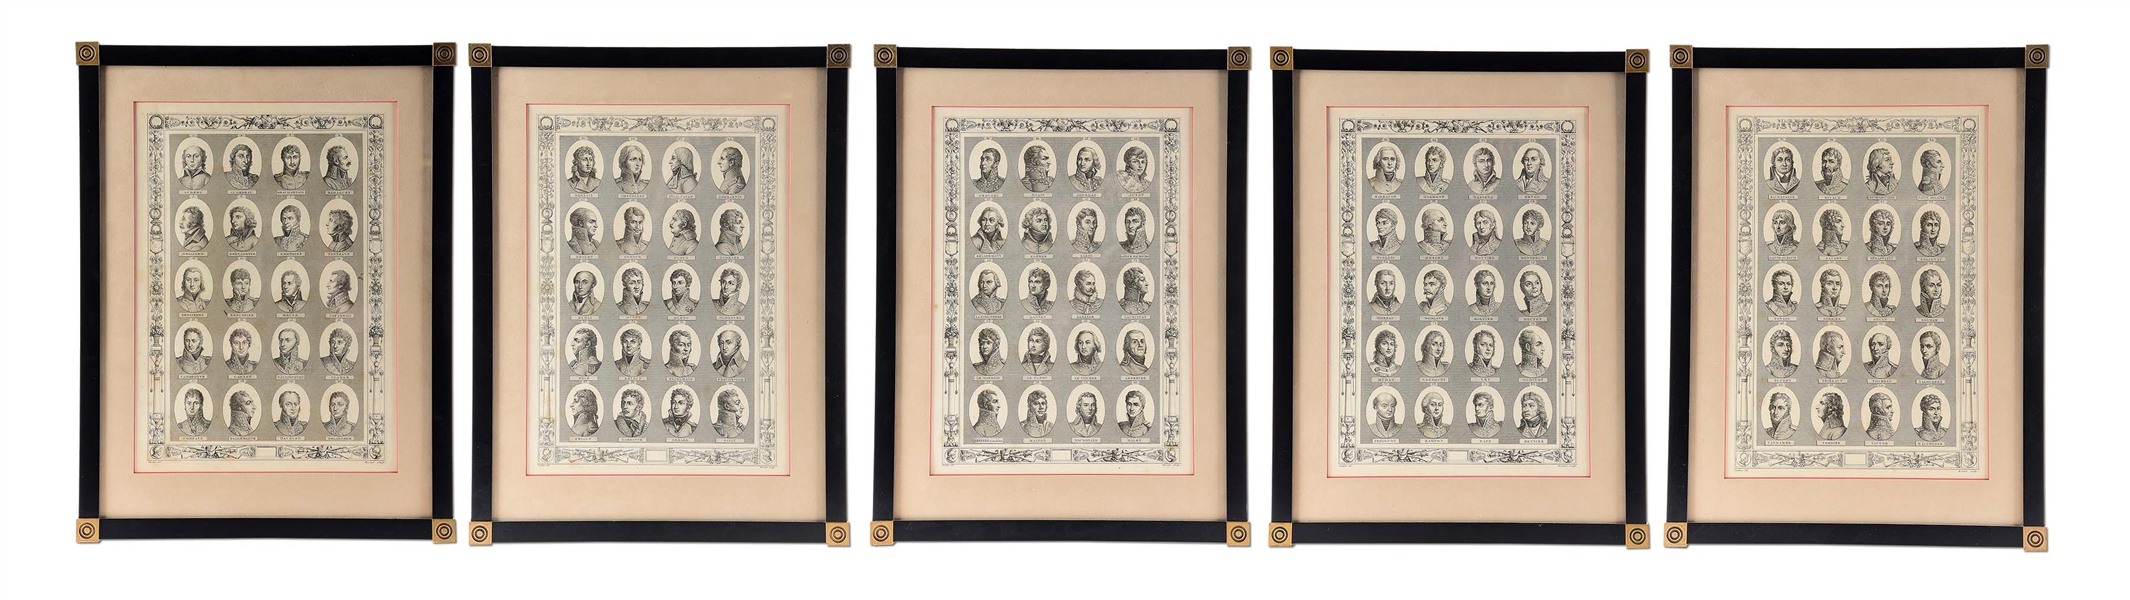 COMPLETE FRAMED SET OF FIVE INDIVIDUAL PRINTS OF NAPOLEONIC OFFICERS, CIRCA. 1806, ENGRAVED BY EDME BOVINET.